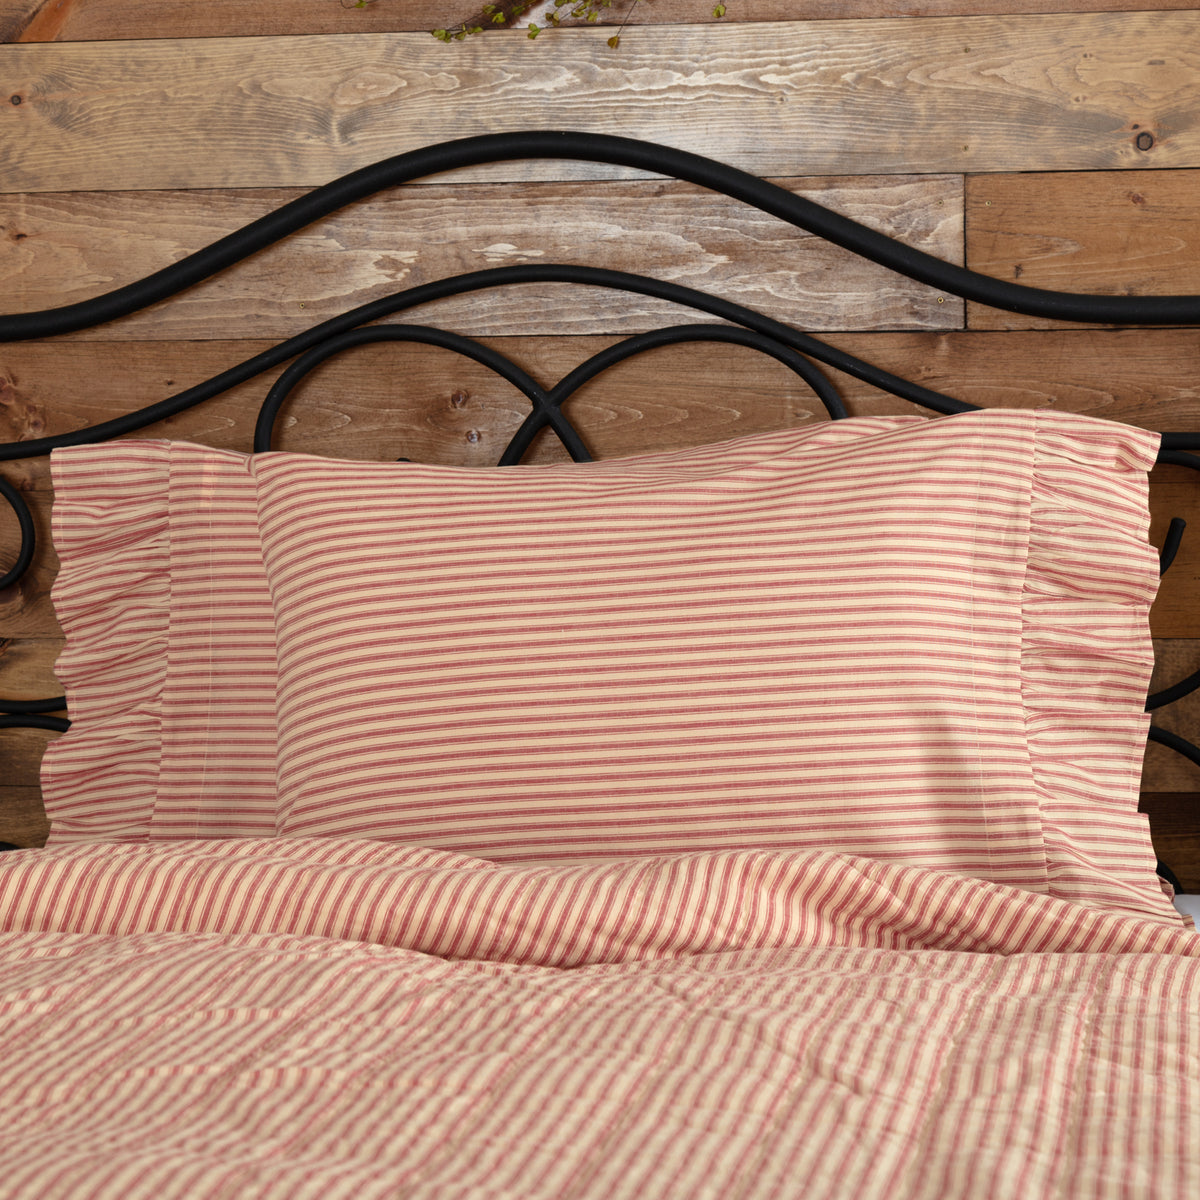 April & Olive Sawyer Mill Red Ticking Stripe Ruffled Standard Pillow Case Set of 2 21x30 By VHC Brands